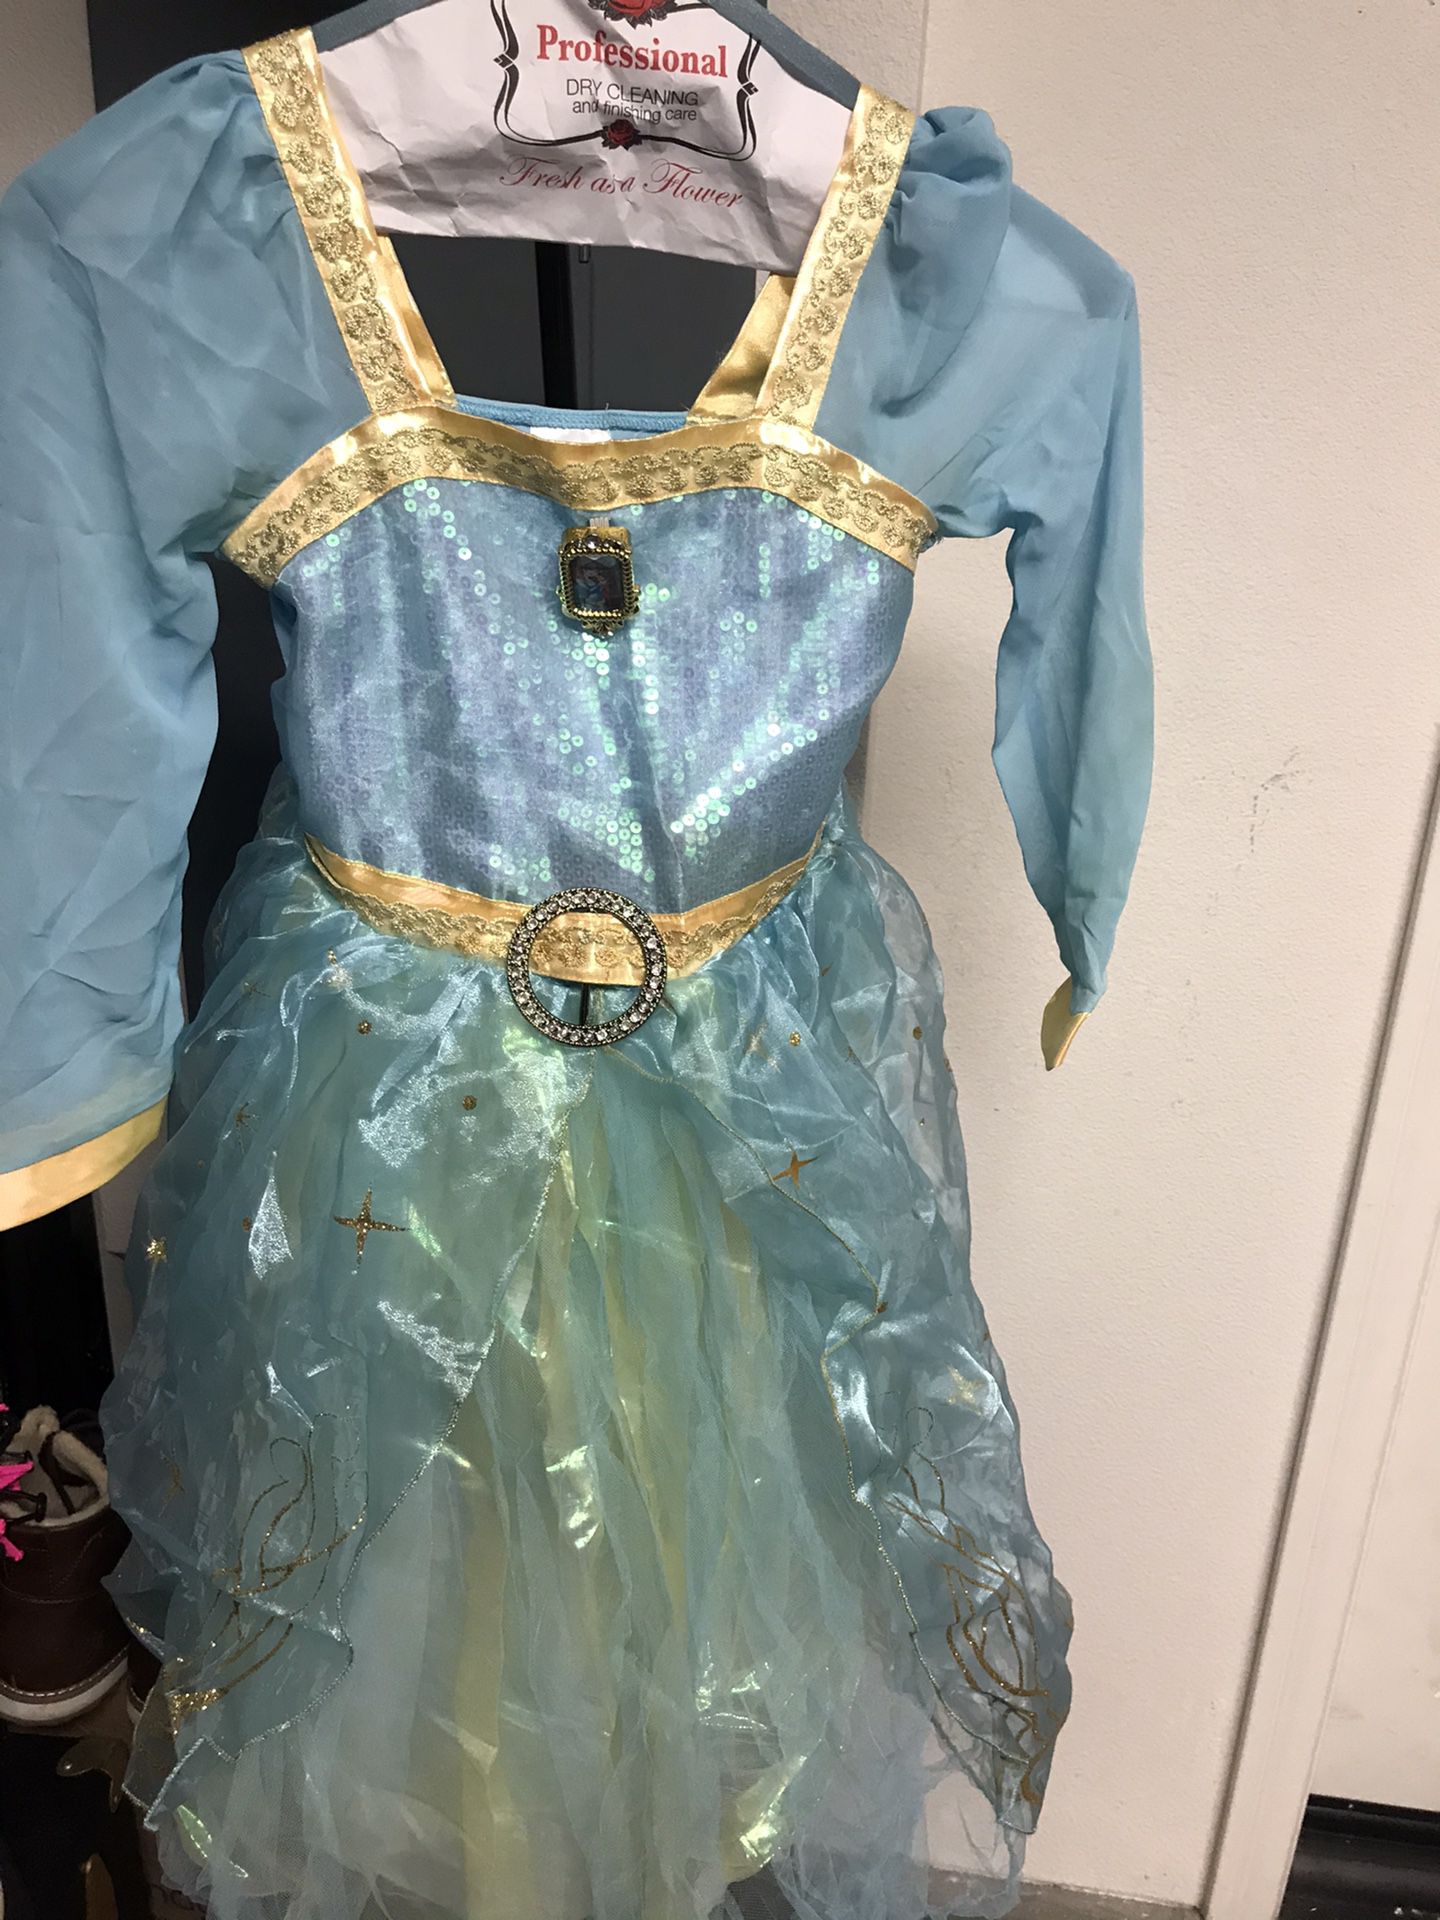 Girls costumes, size, S, M, L